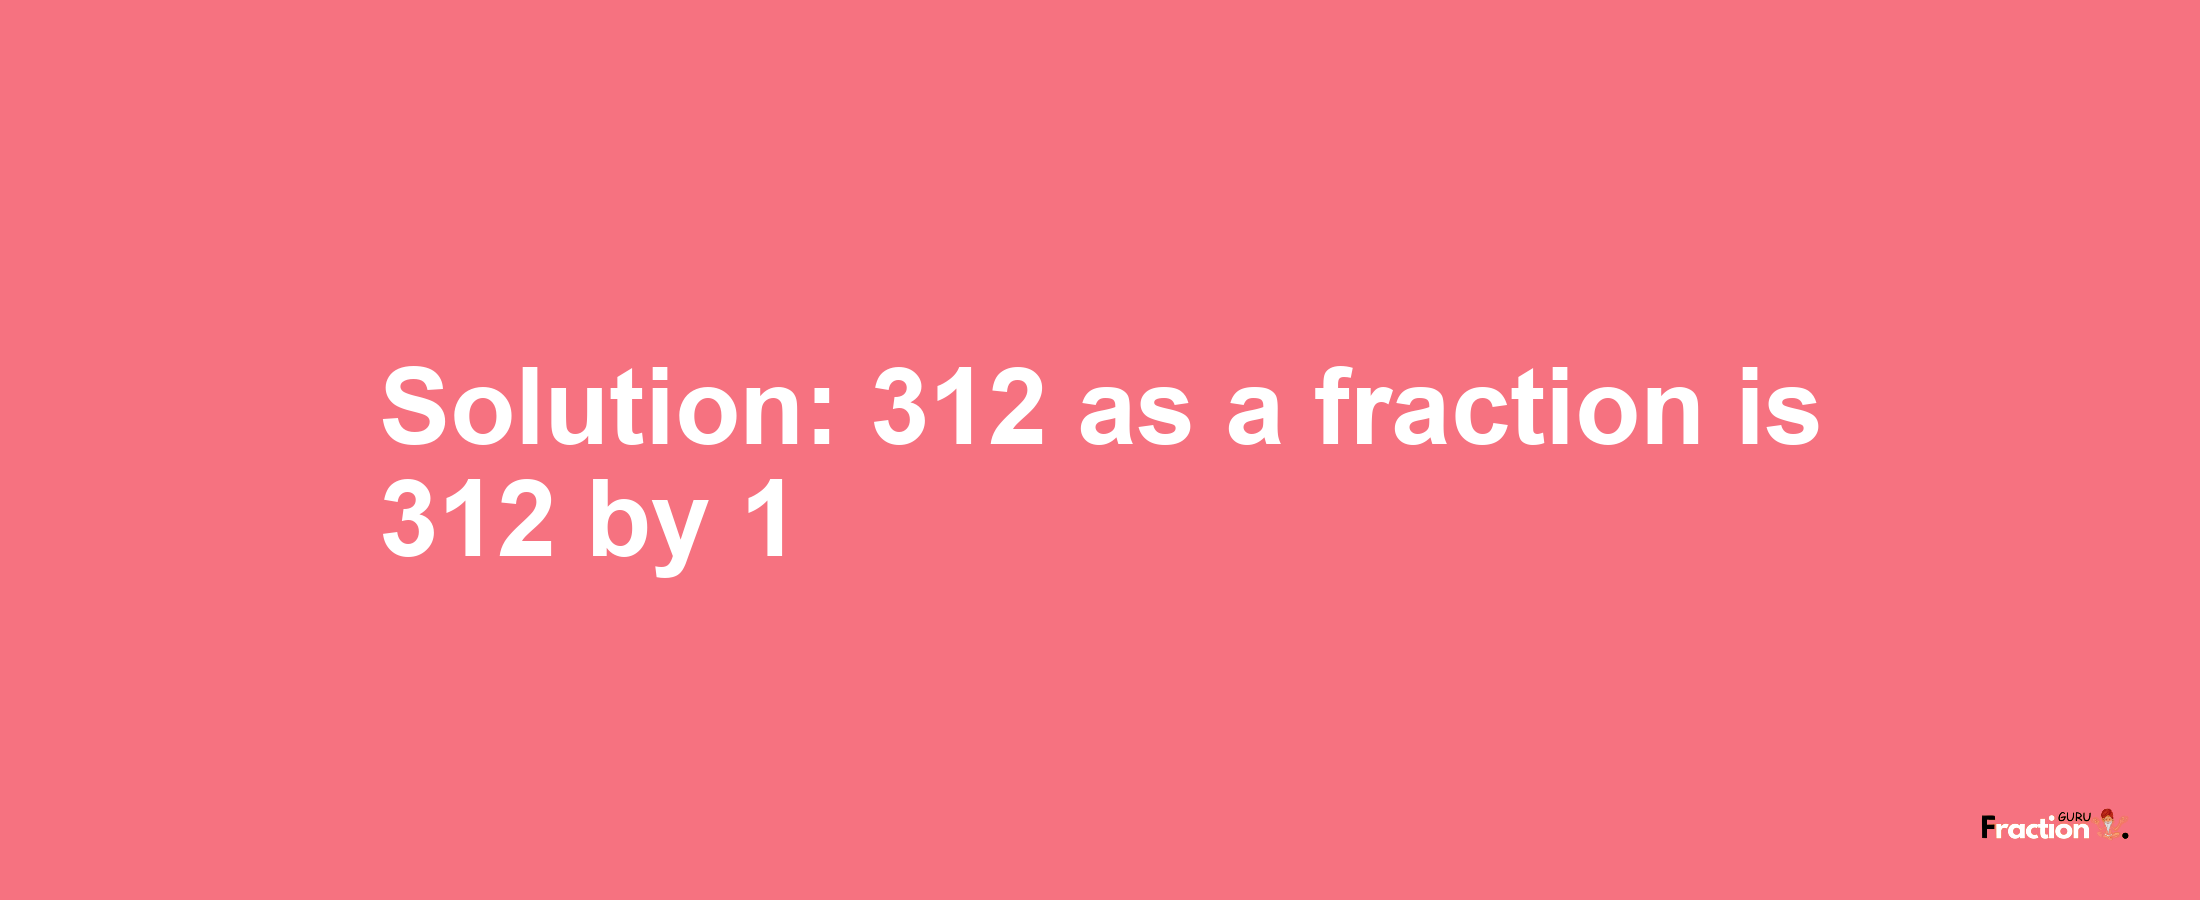 Solution:312 as a fraction is 312/1